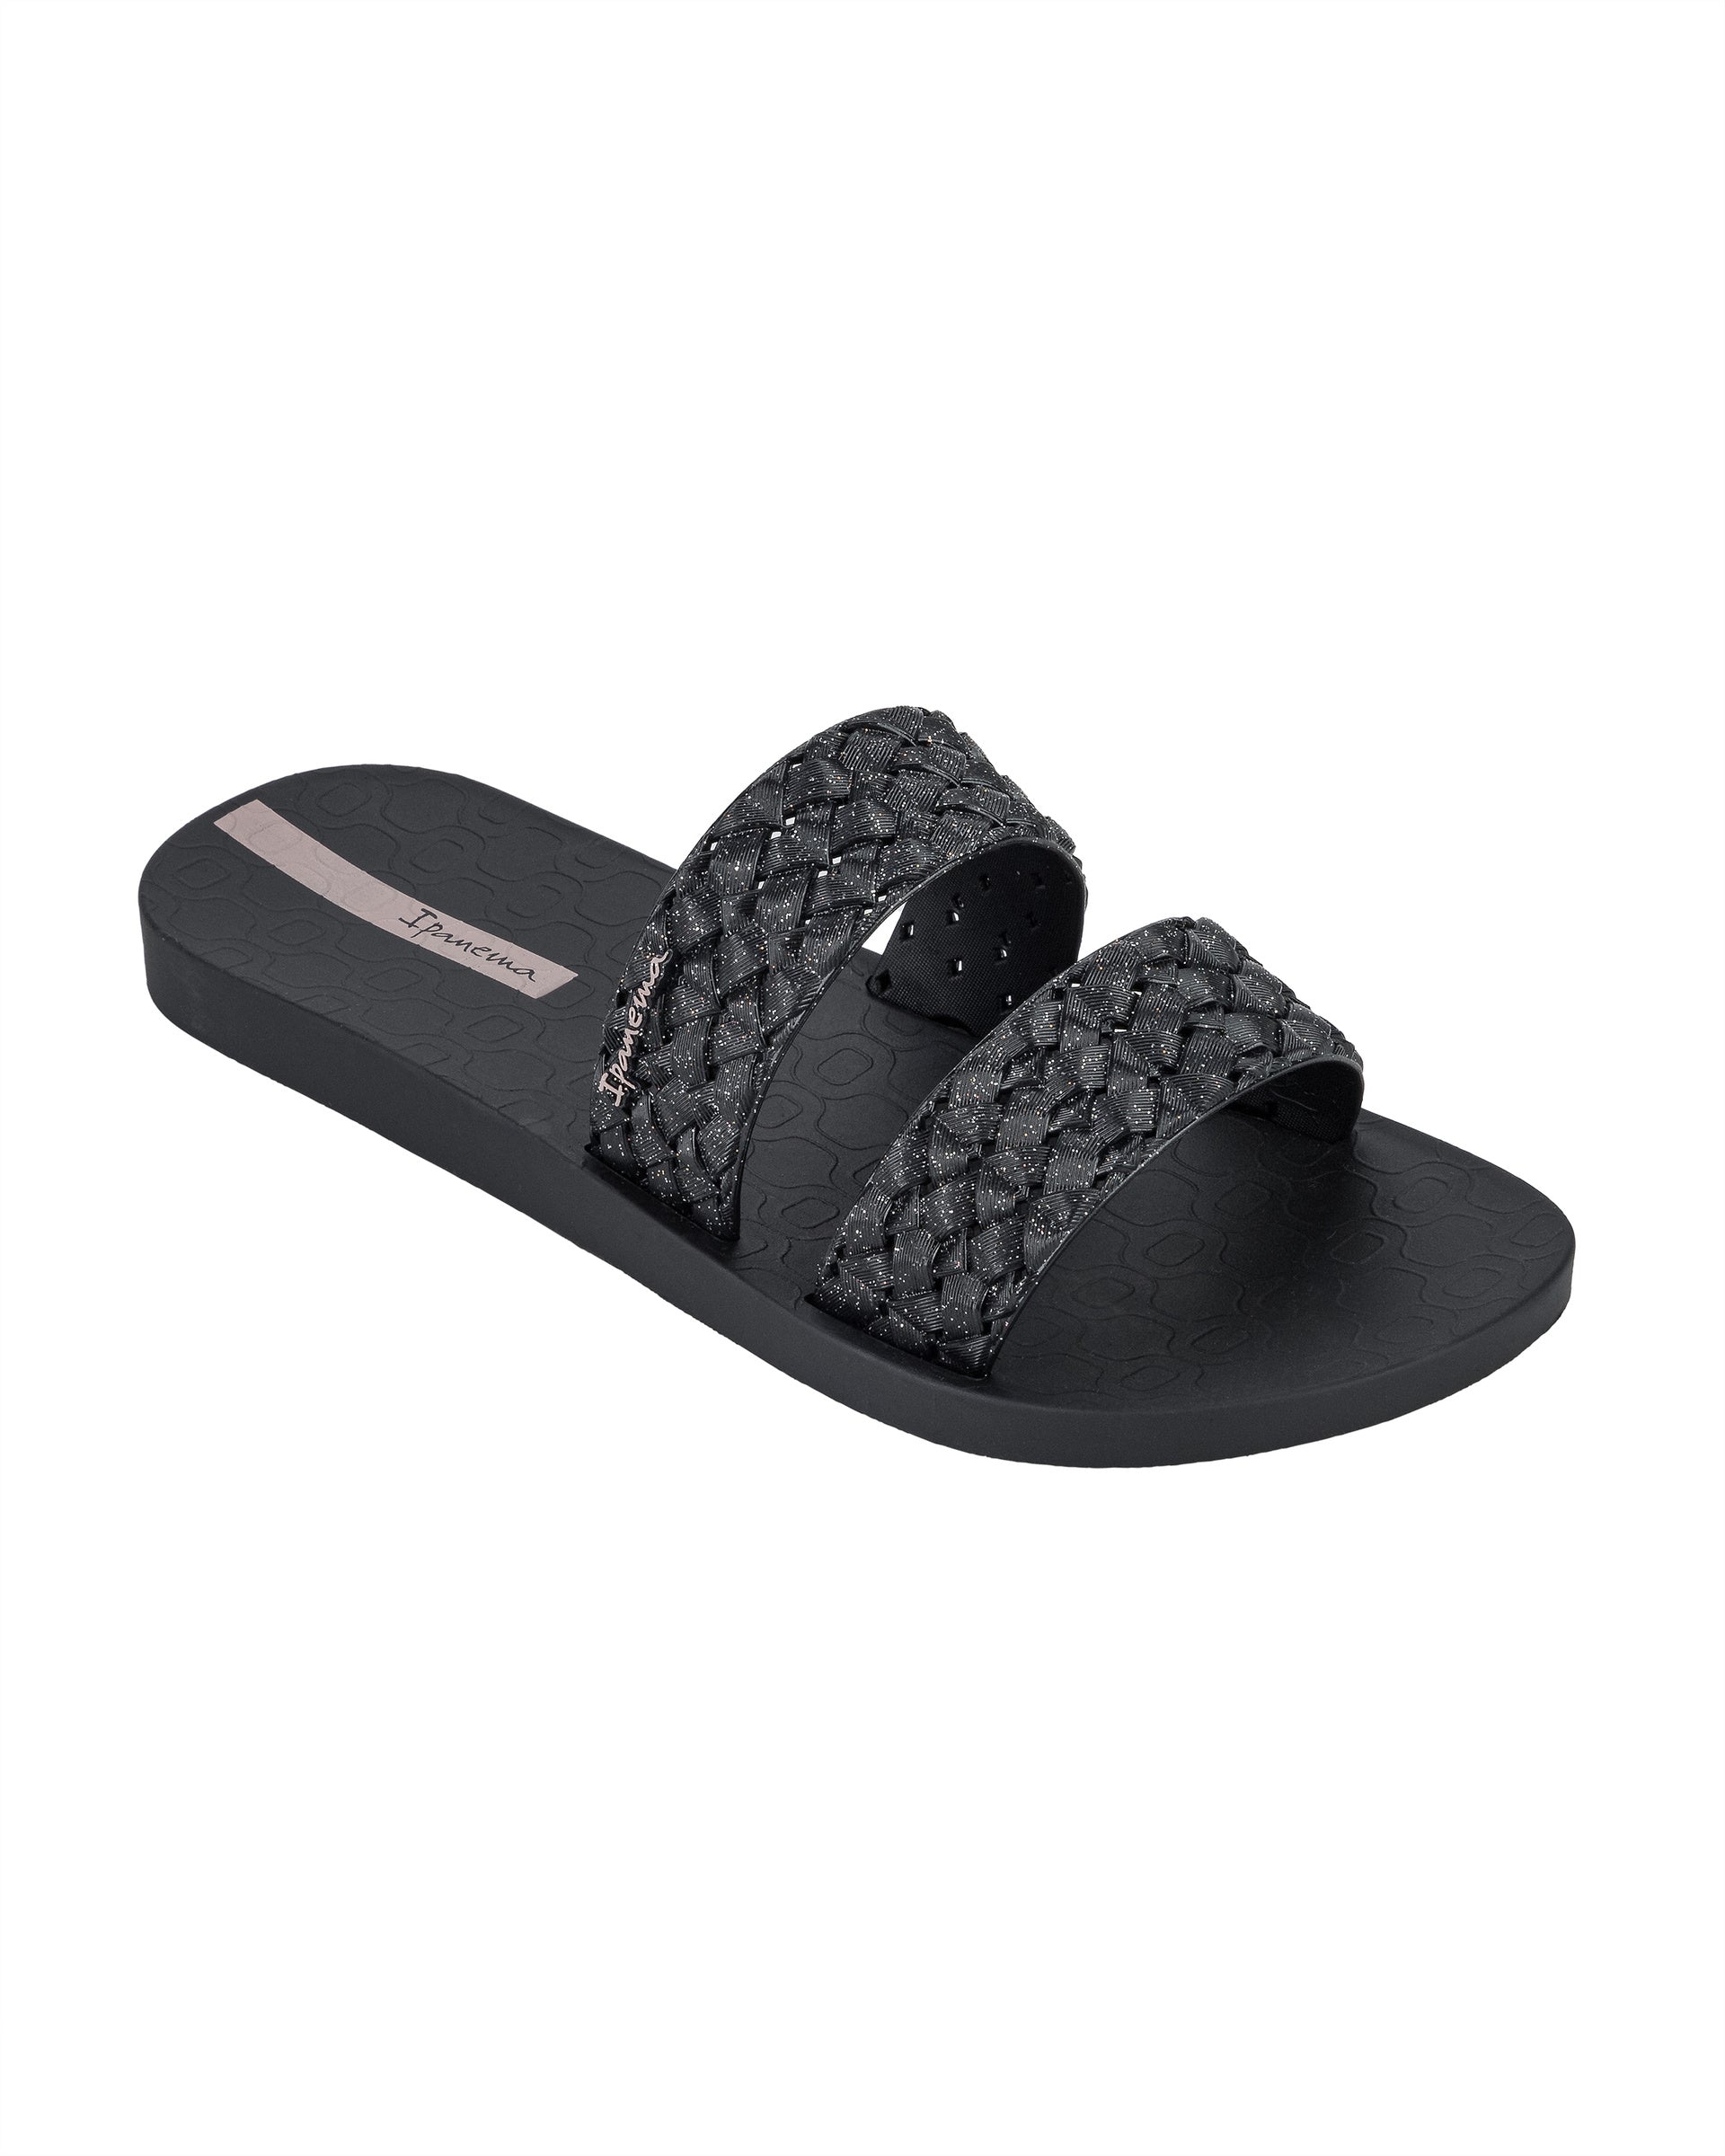 Angled view of a pink Ipanema Renda women's slide with braided pink glitter straps.